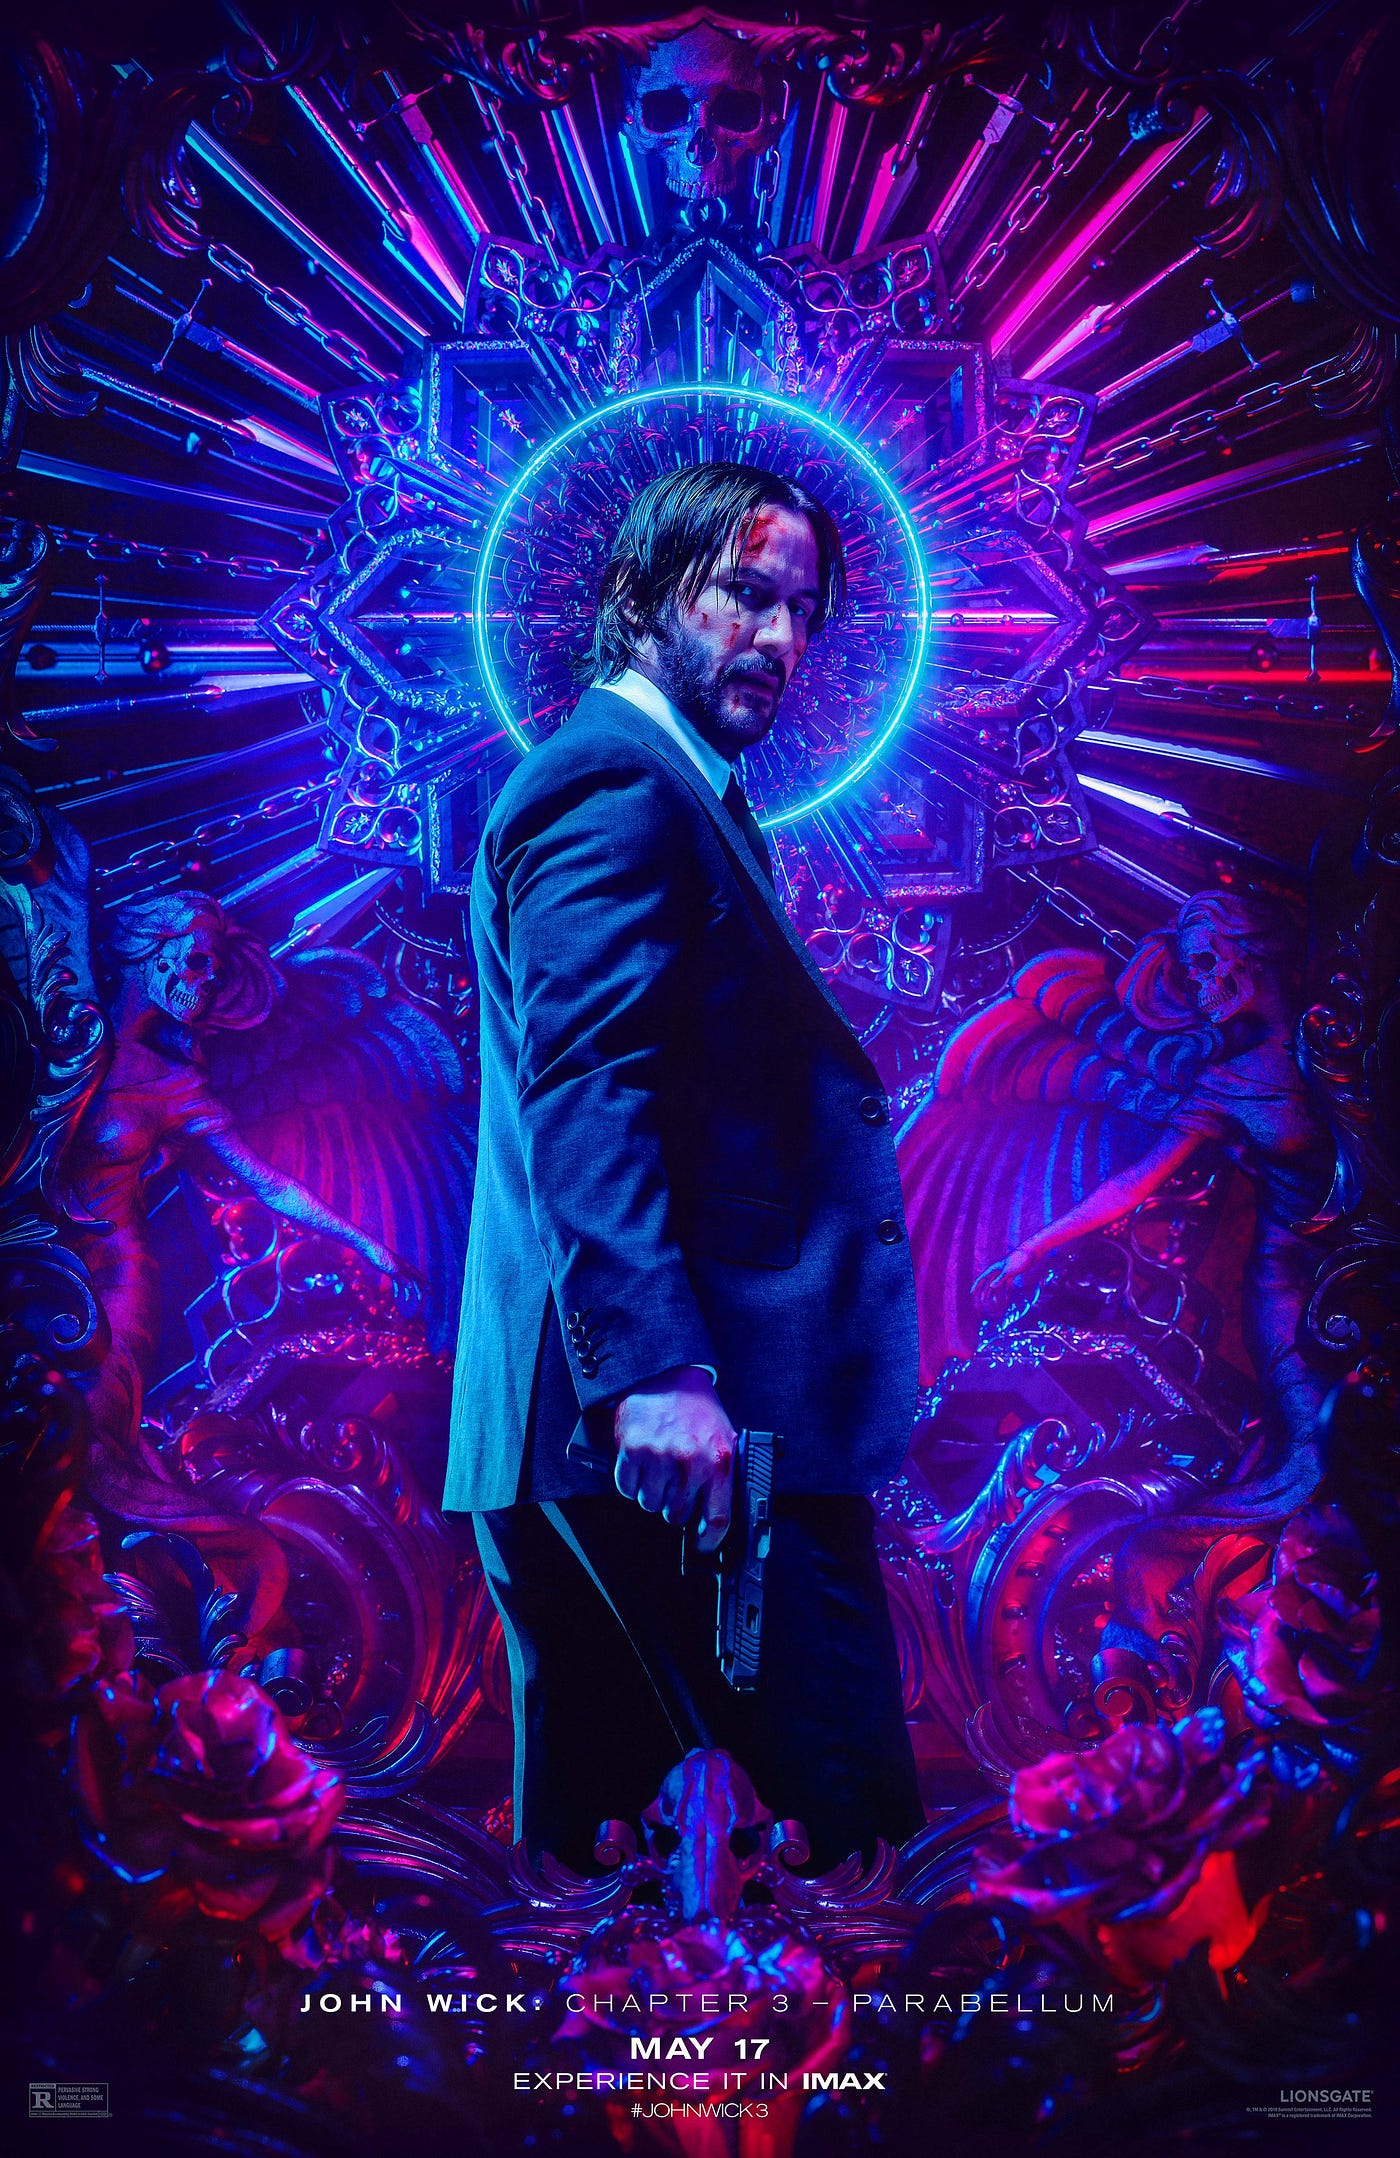 The Continental won't return for episode 4 but the John Wick franchise is  far from